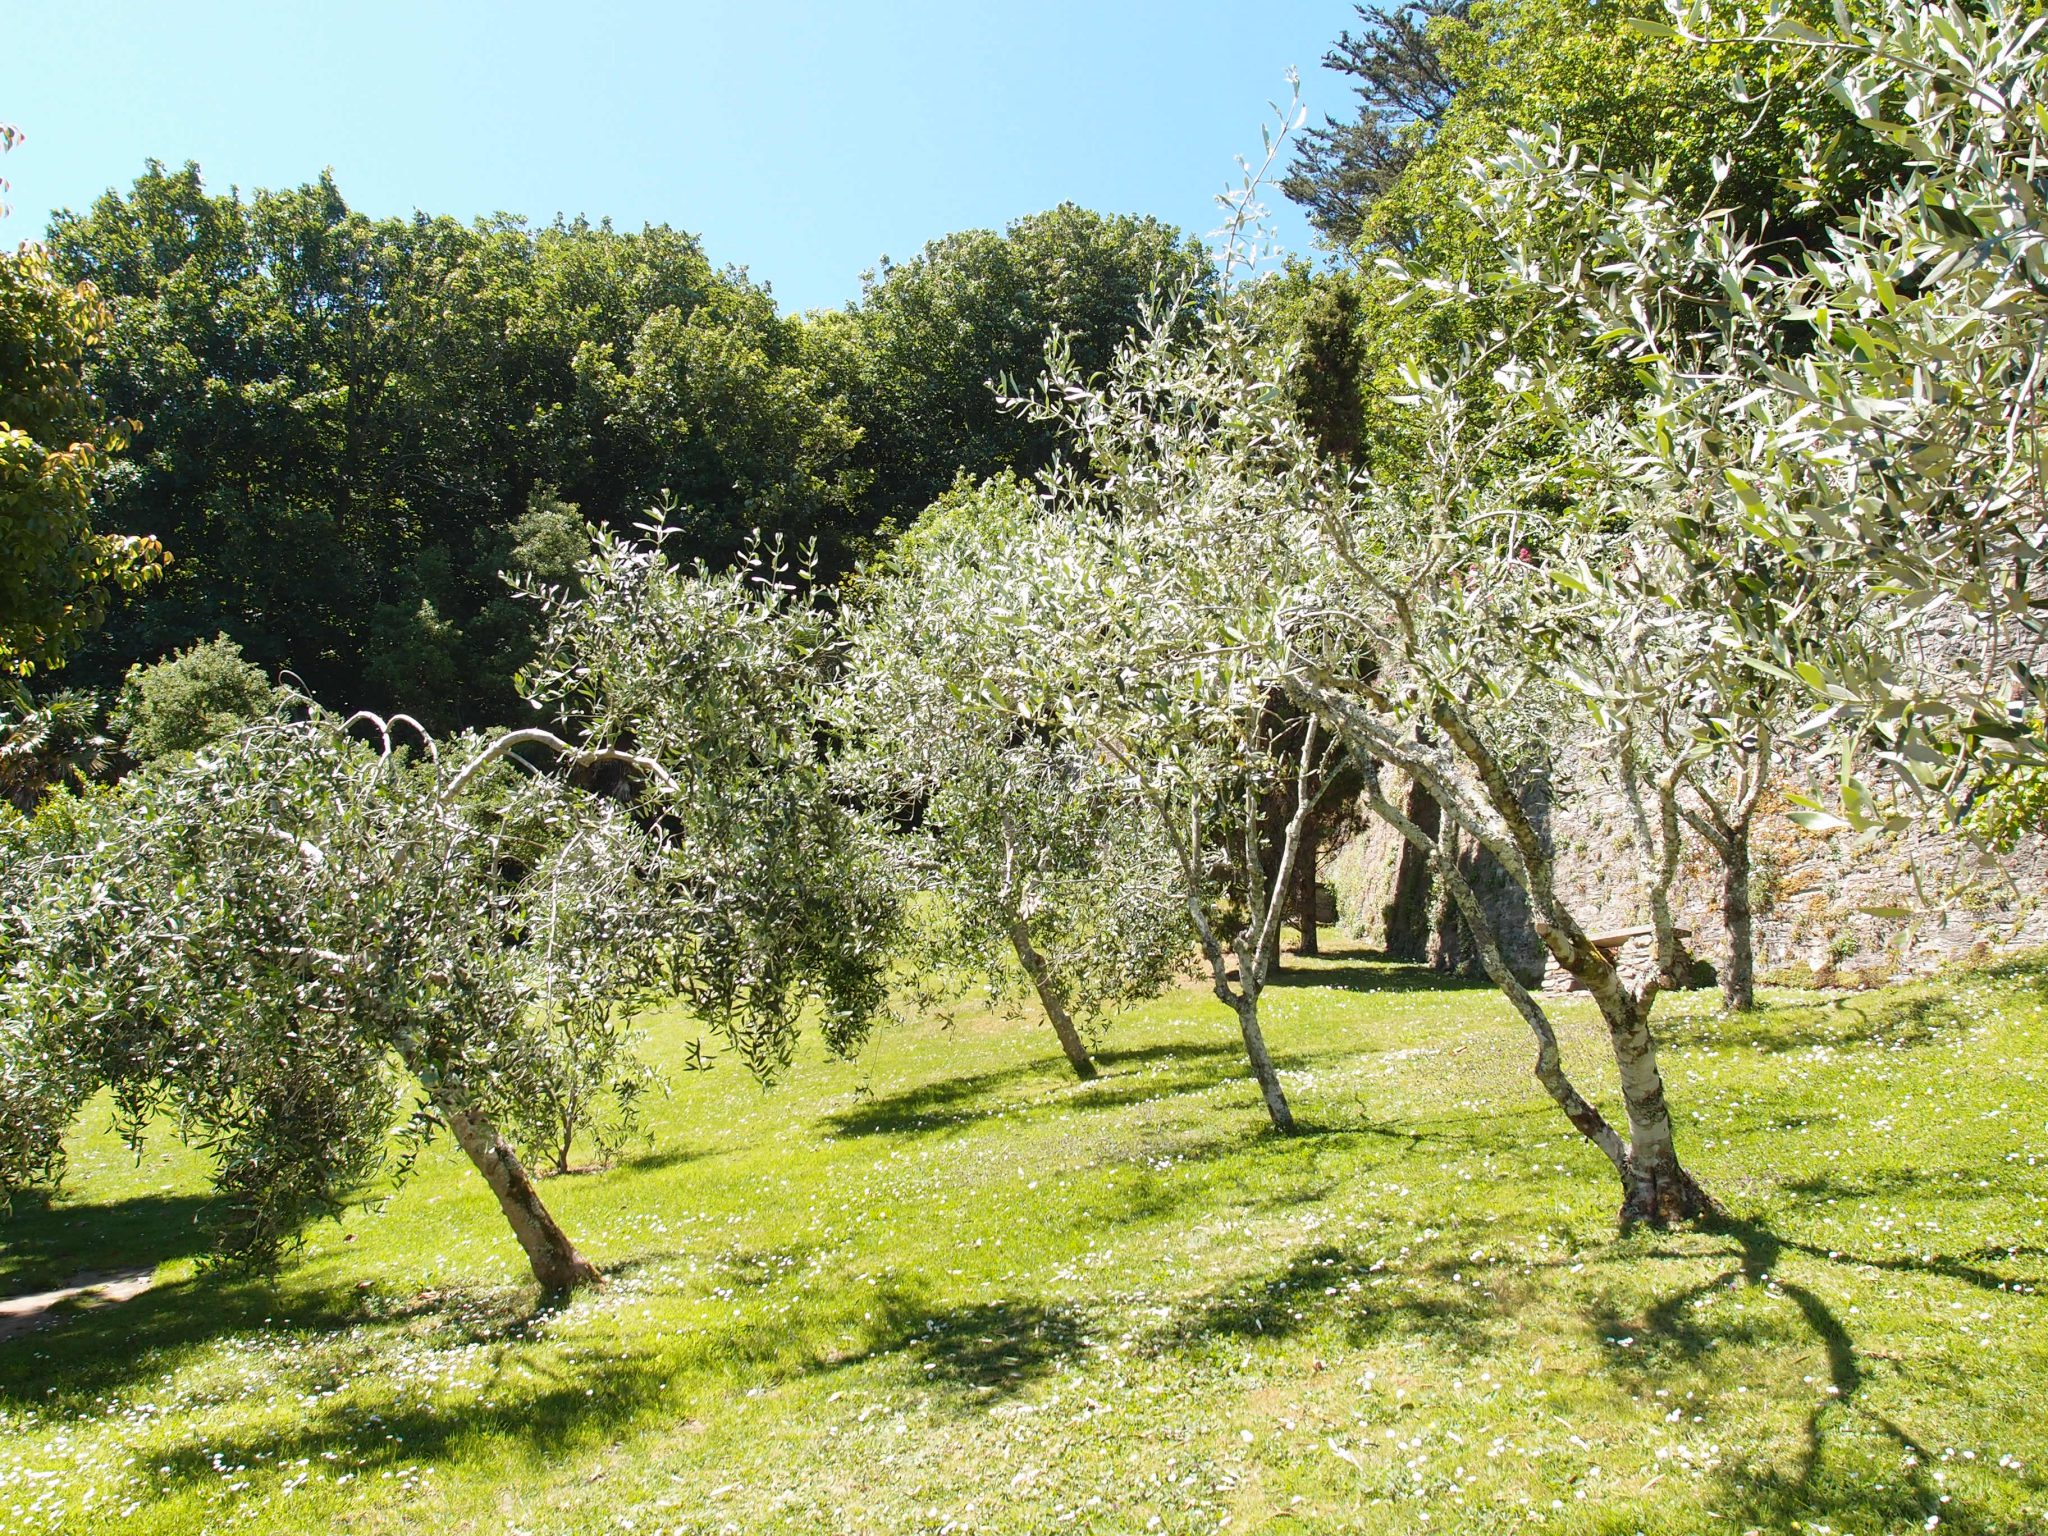 The Olive Grove is planted at the highest point in the Gardens.